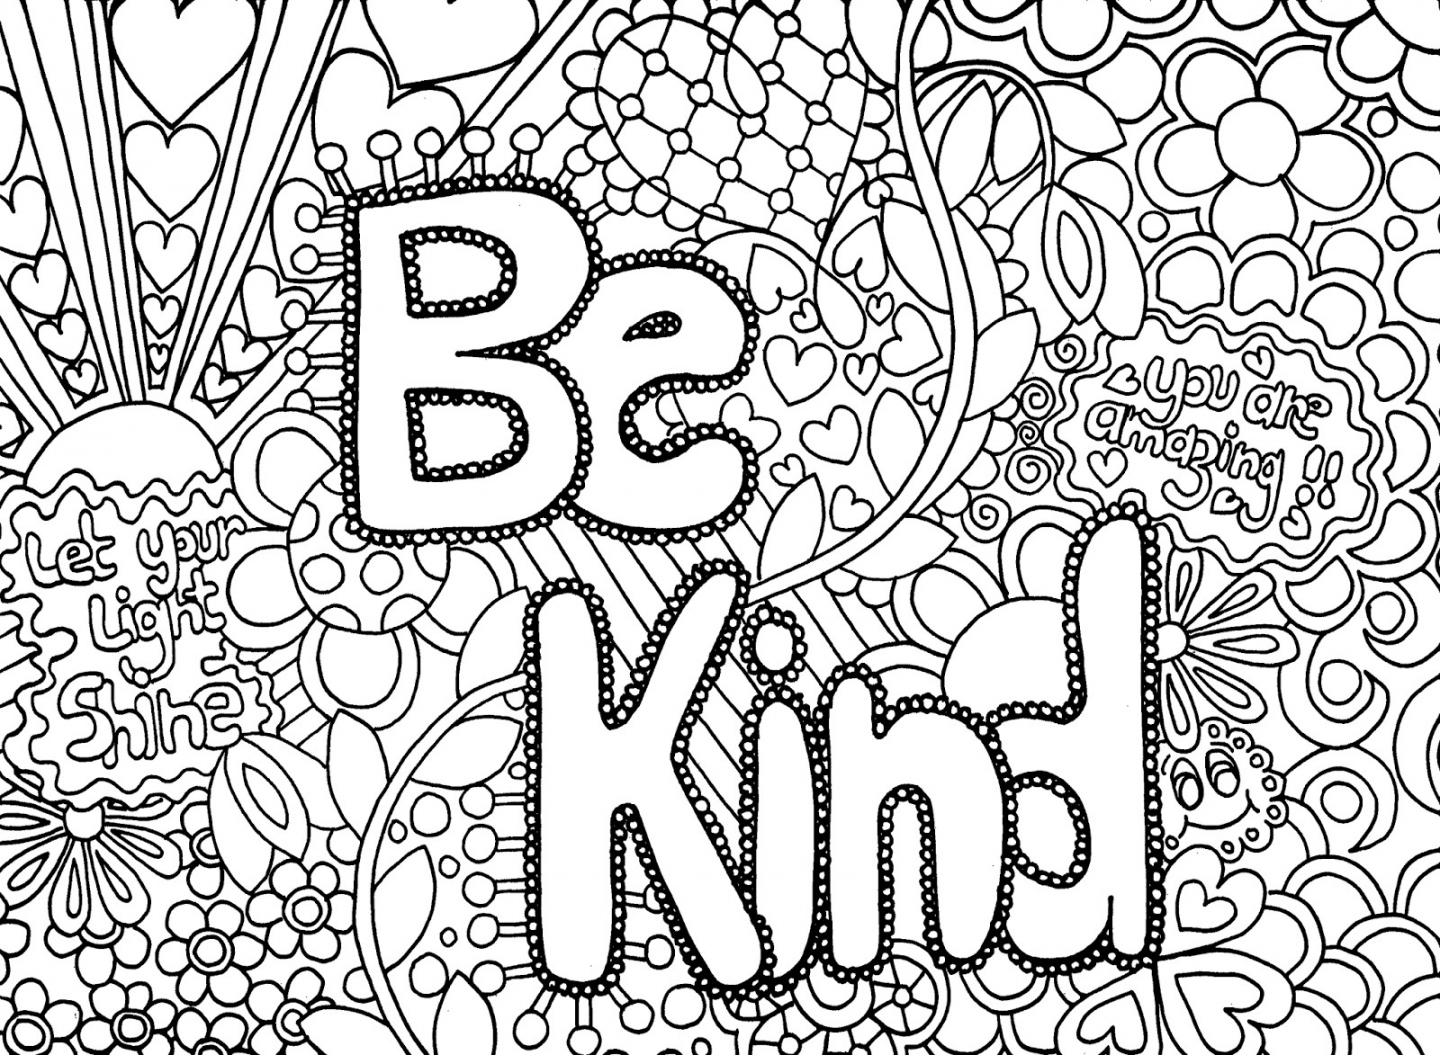 Kindness Coloring Pages - Best Coloring Pages For Kids - FREE Printables - Free Printable Kindness Worksheets